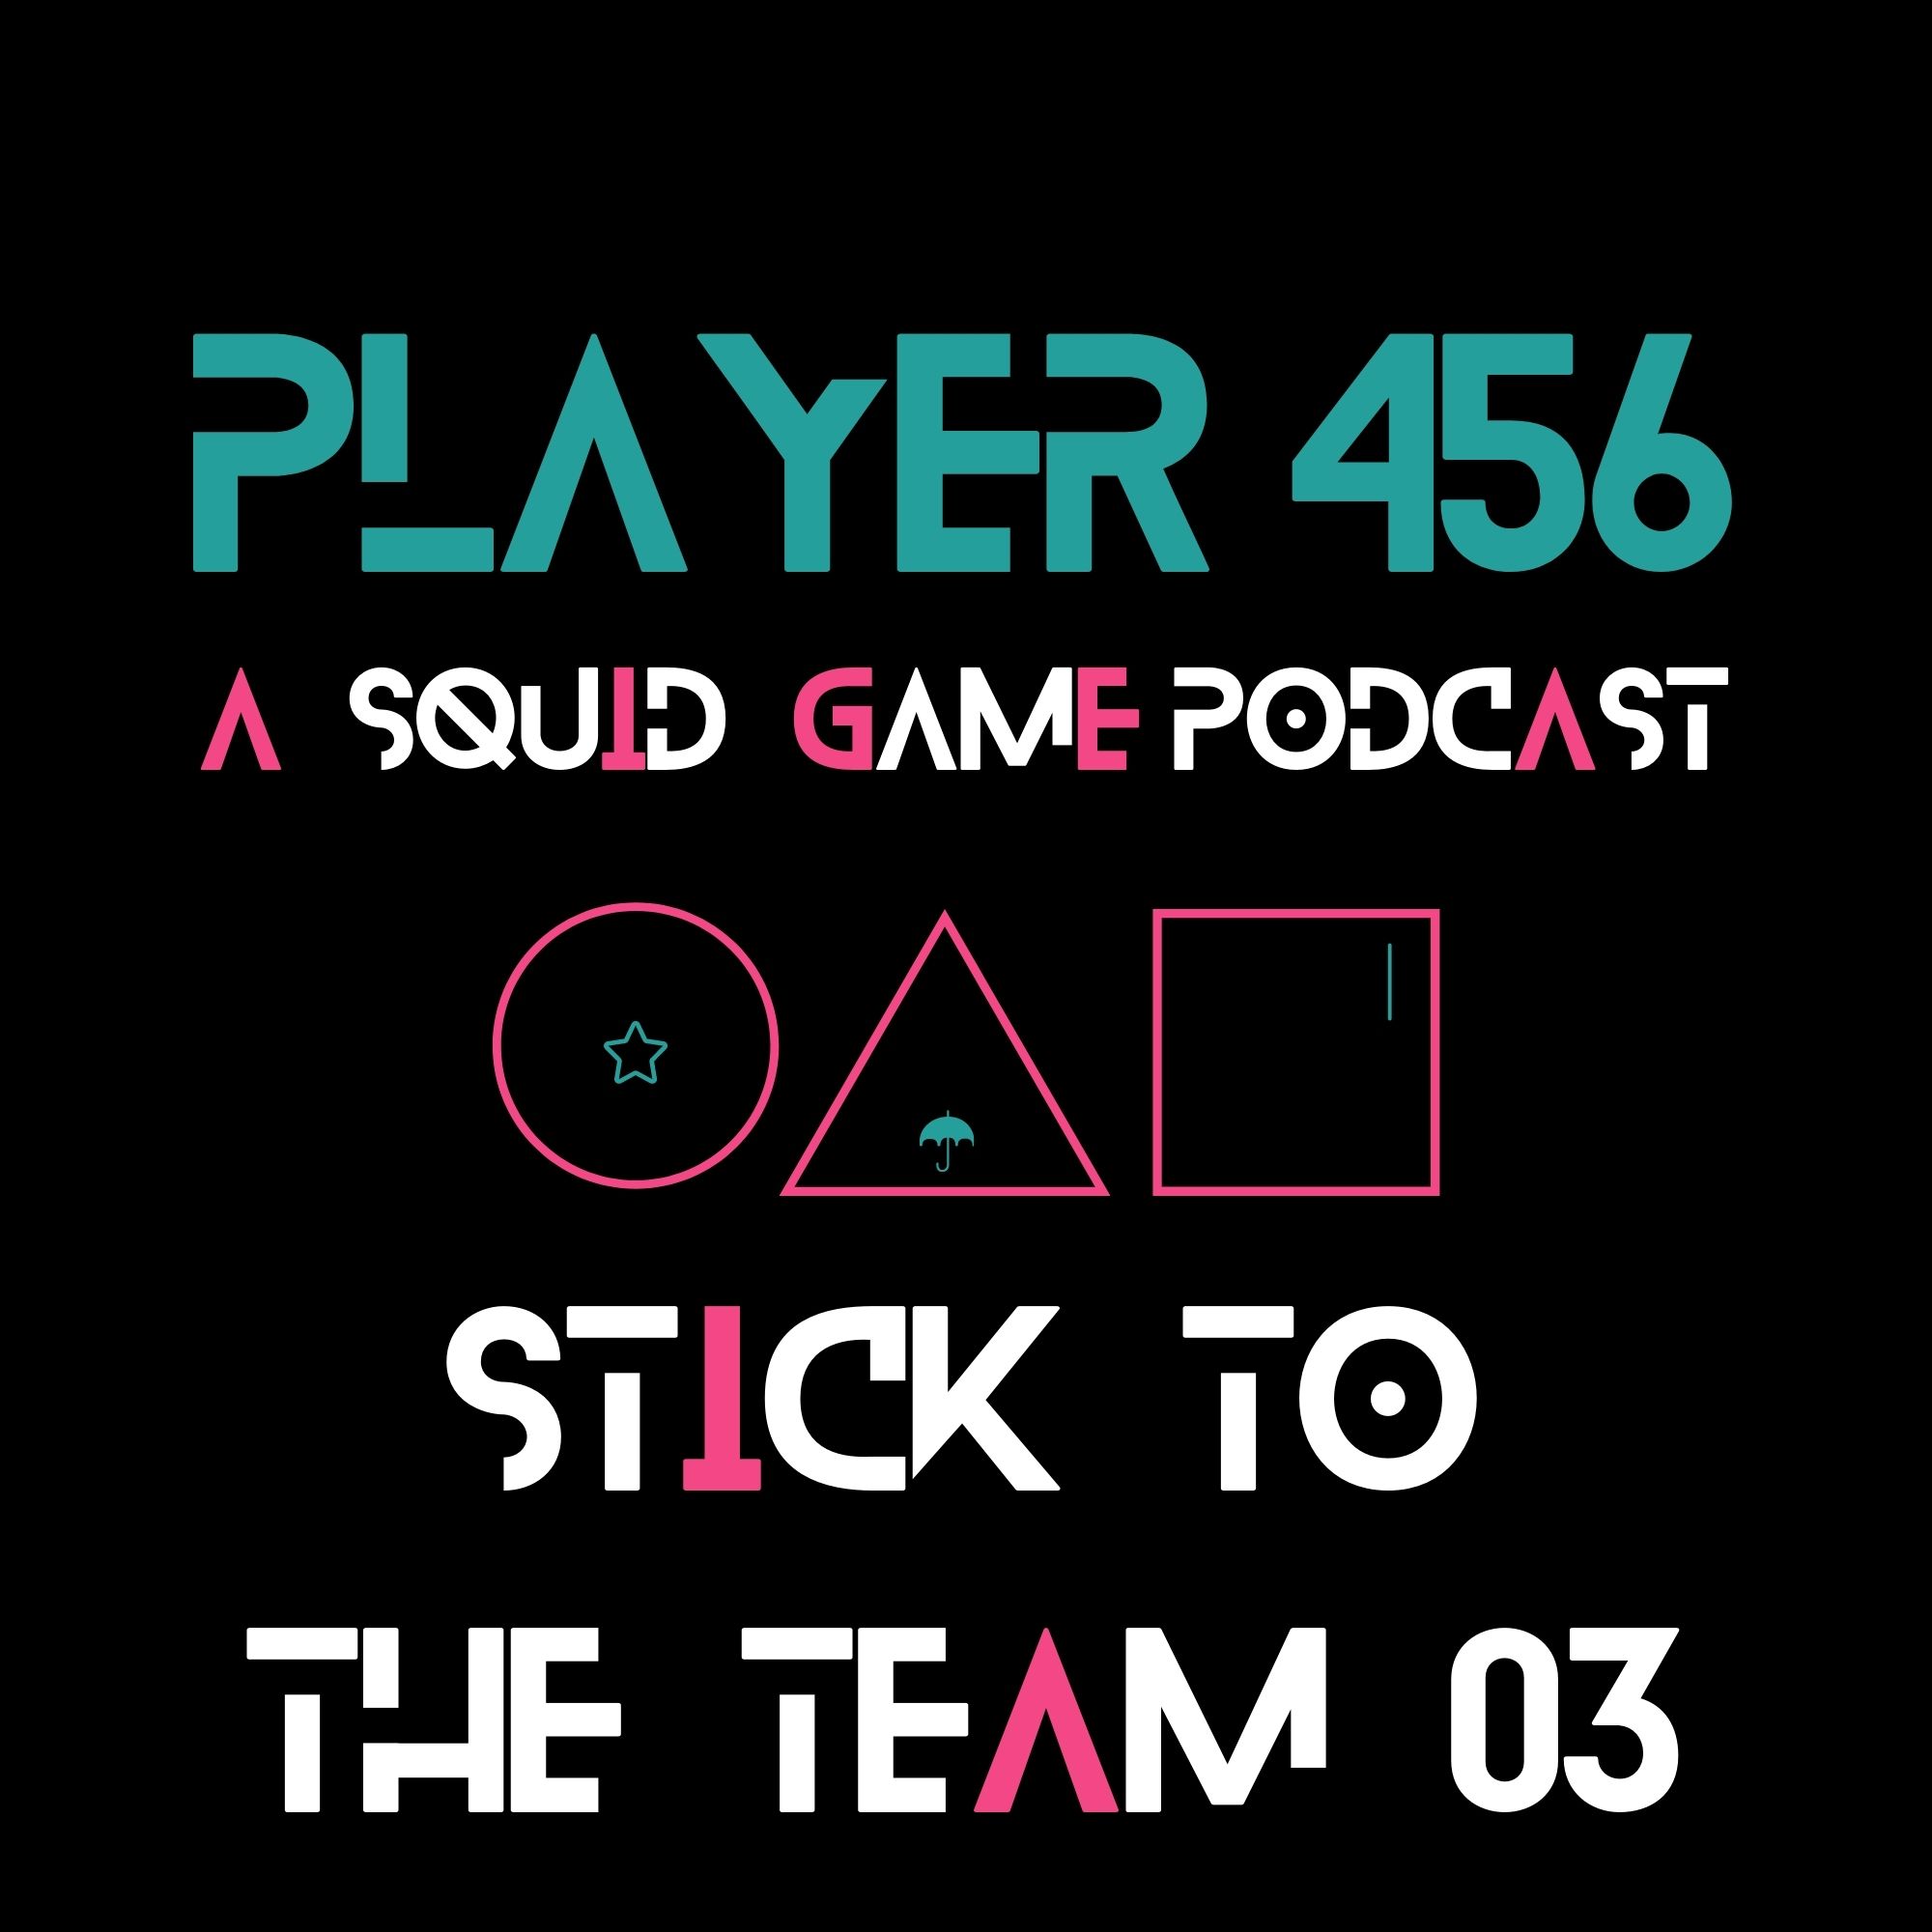 Stick to the Team: Squid Game episode 4 part 3